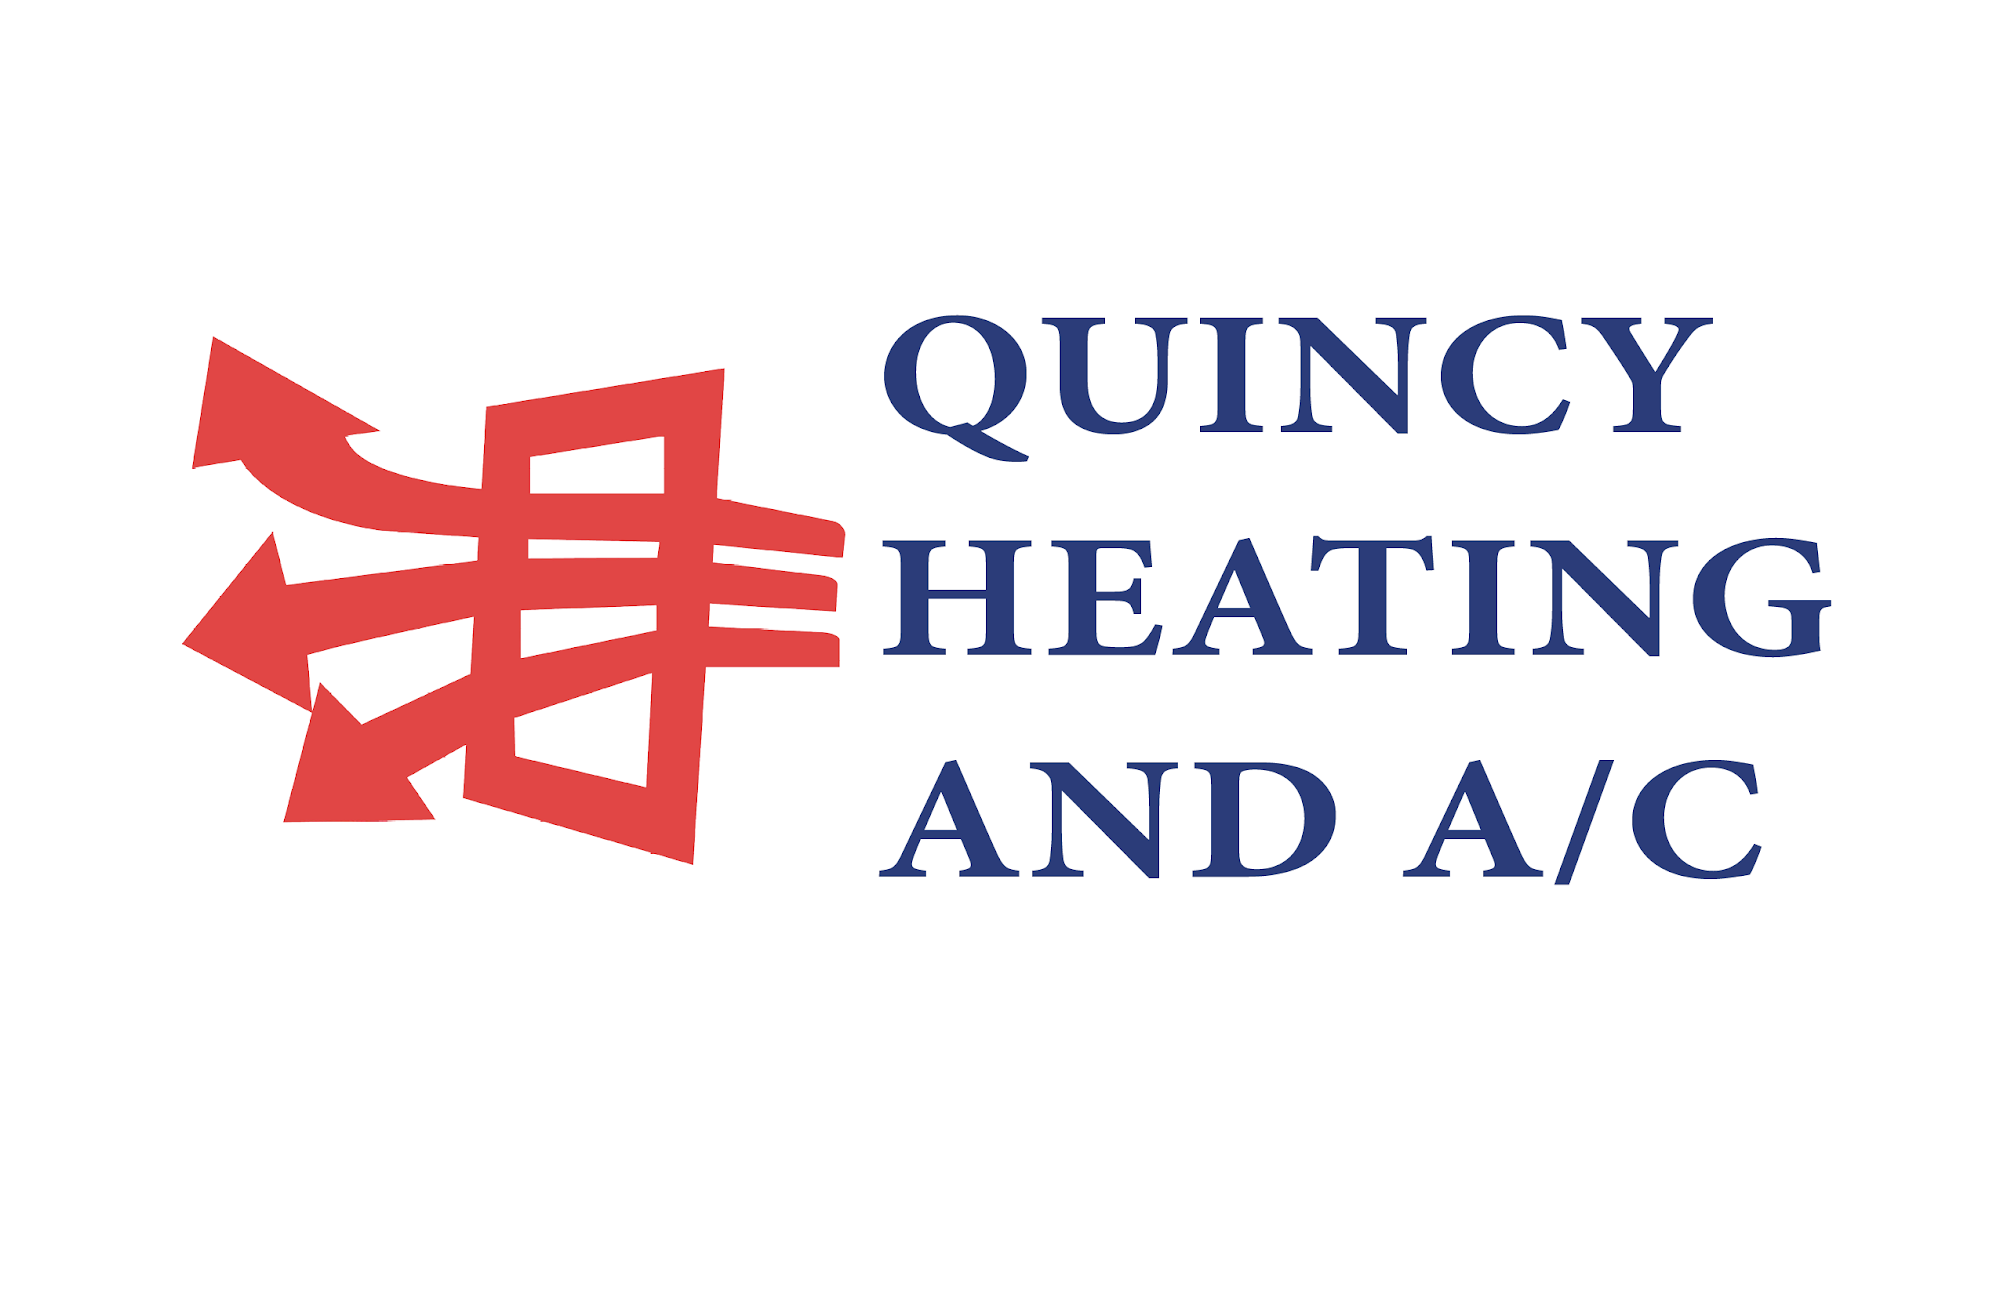 Quincy Heating & Air Conditioning Inc 1307 Central Ave S, Quincy Washington 98848